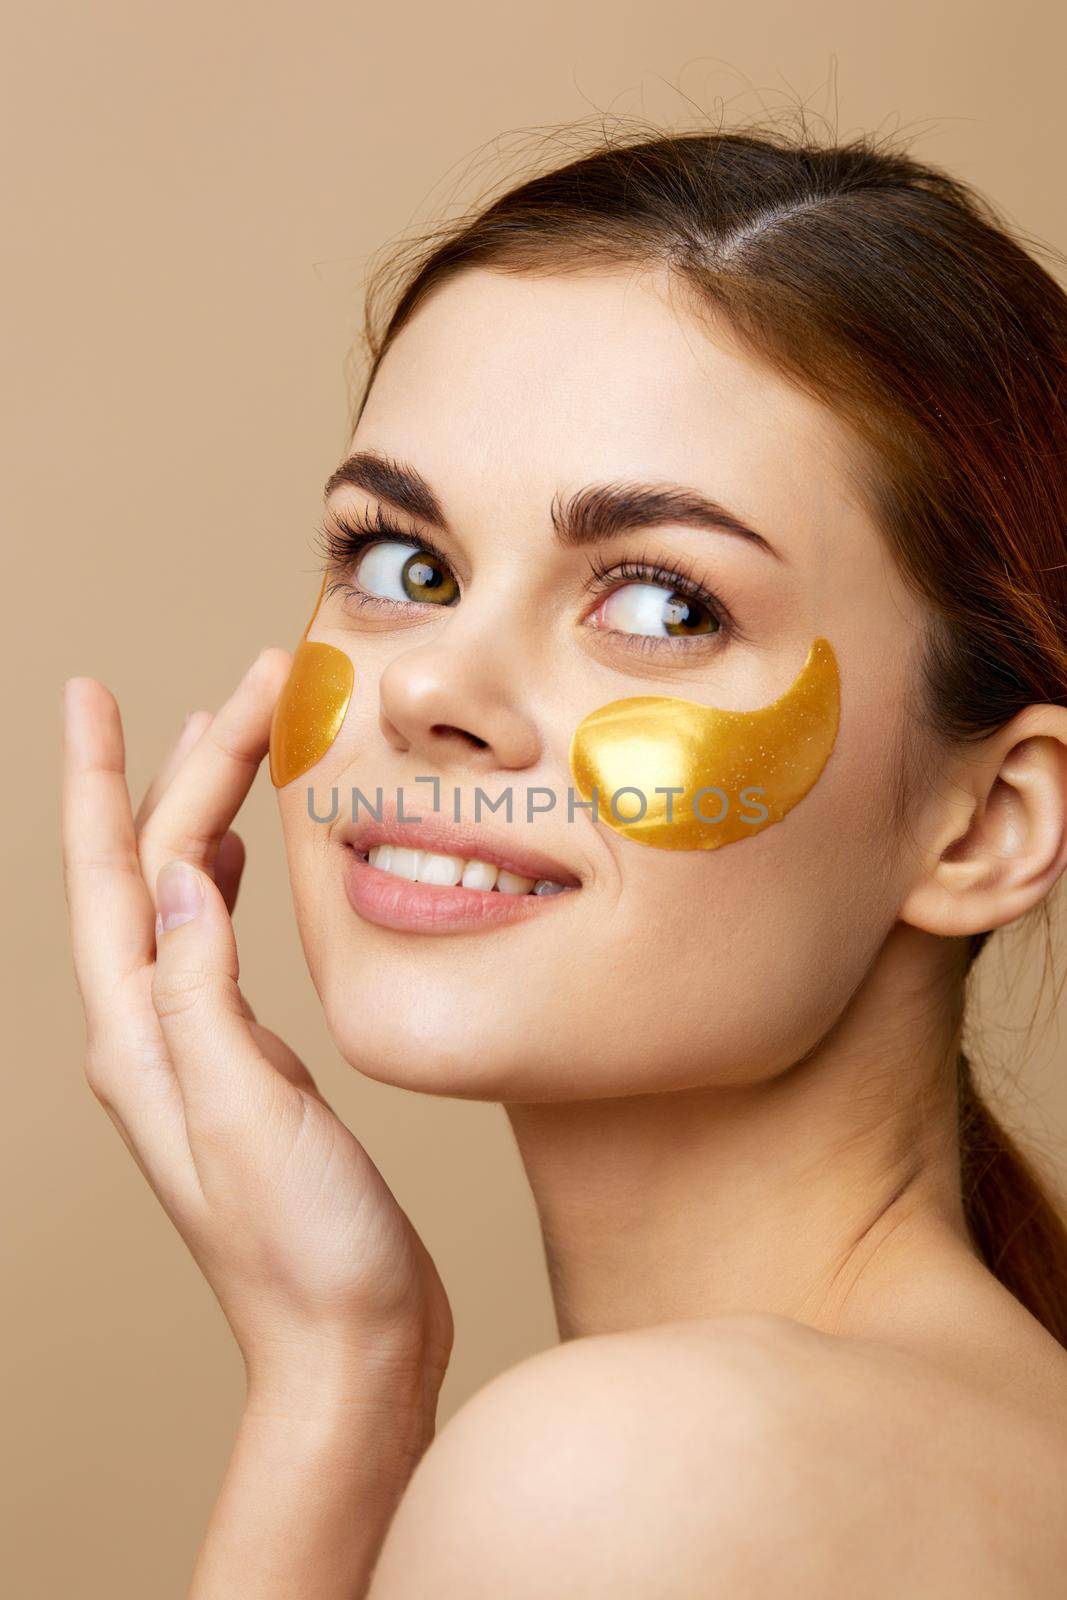 pretty woman patches rejuvenation skin care fun after shower close-up Lifestyle. High quality photo